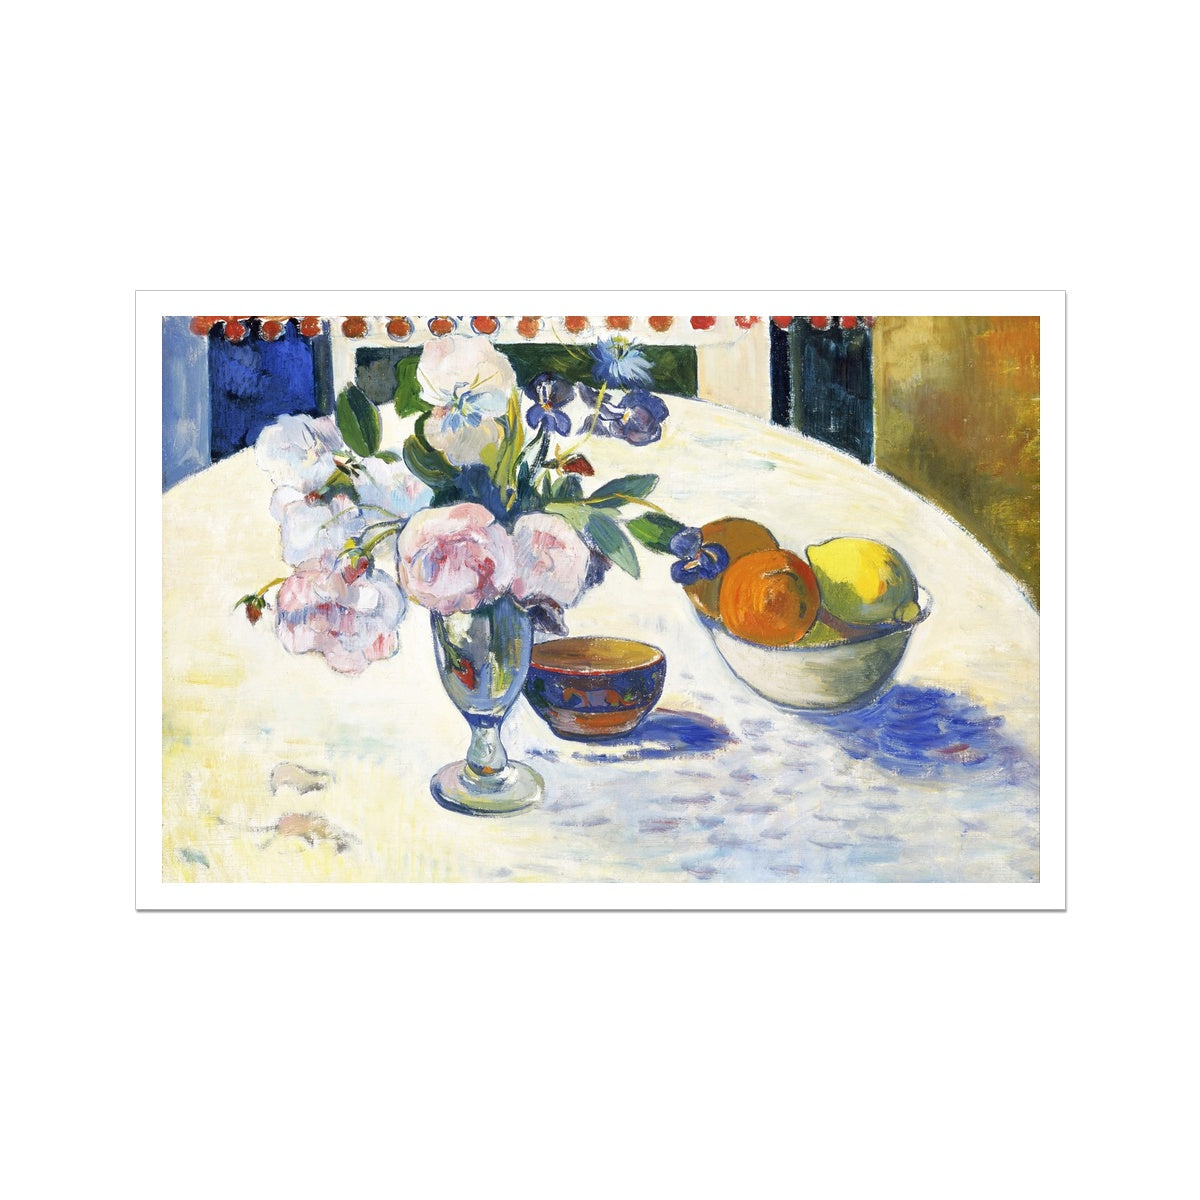 'Flowers and a Bowl of Fruit', Still Life by Paul Gauguin. Open Edition Fine Art Print. Historic Art